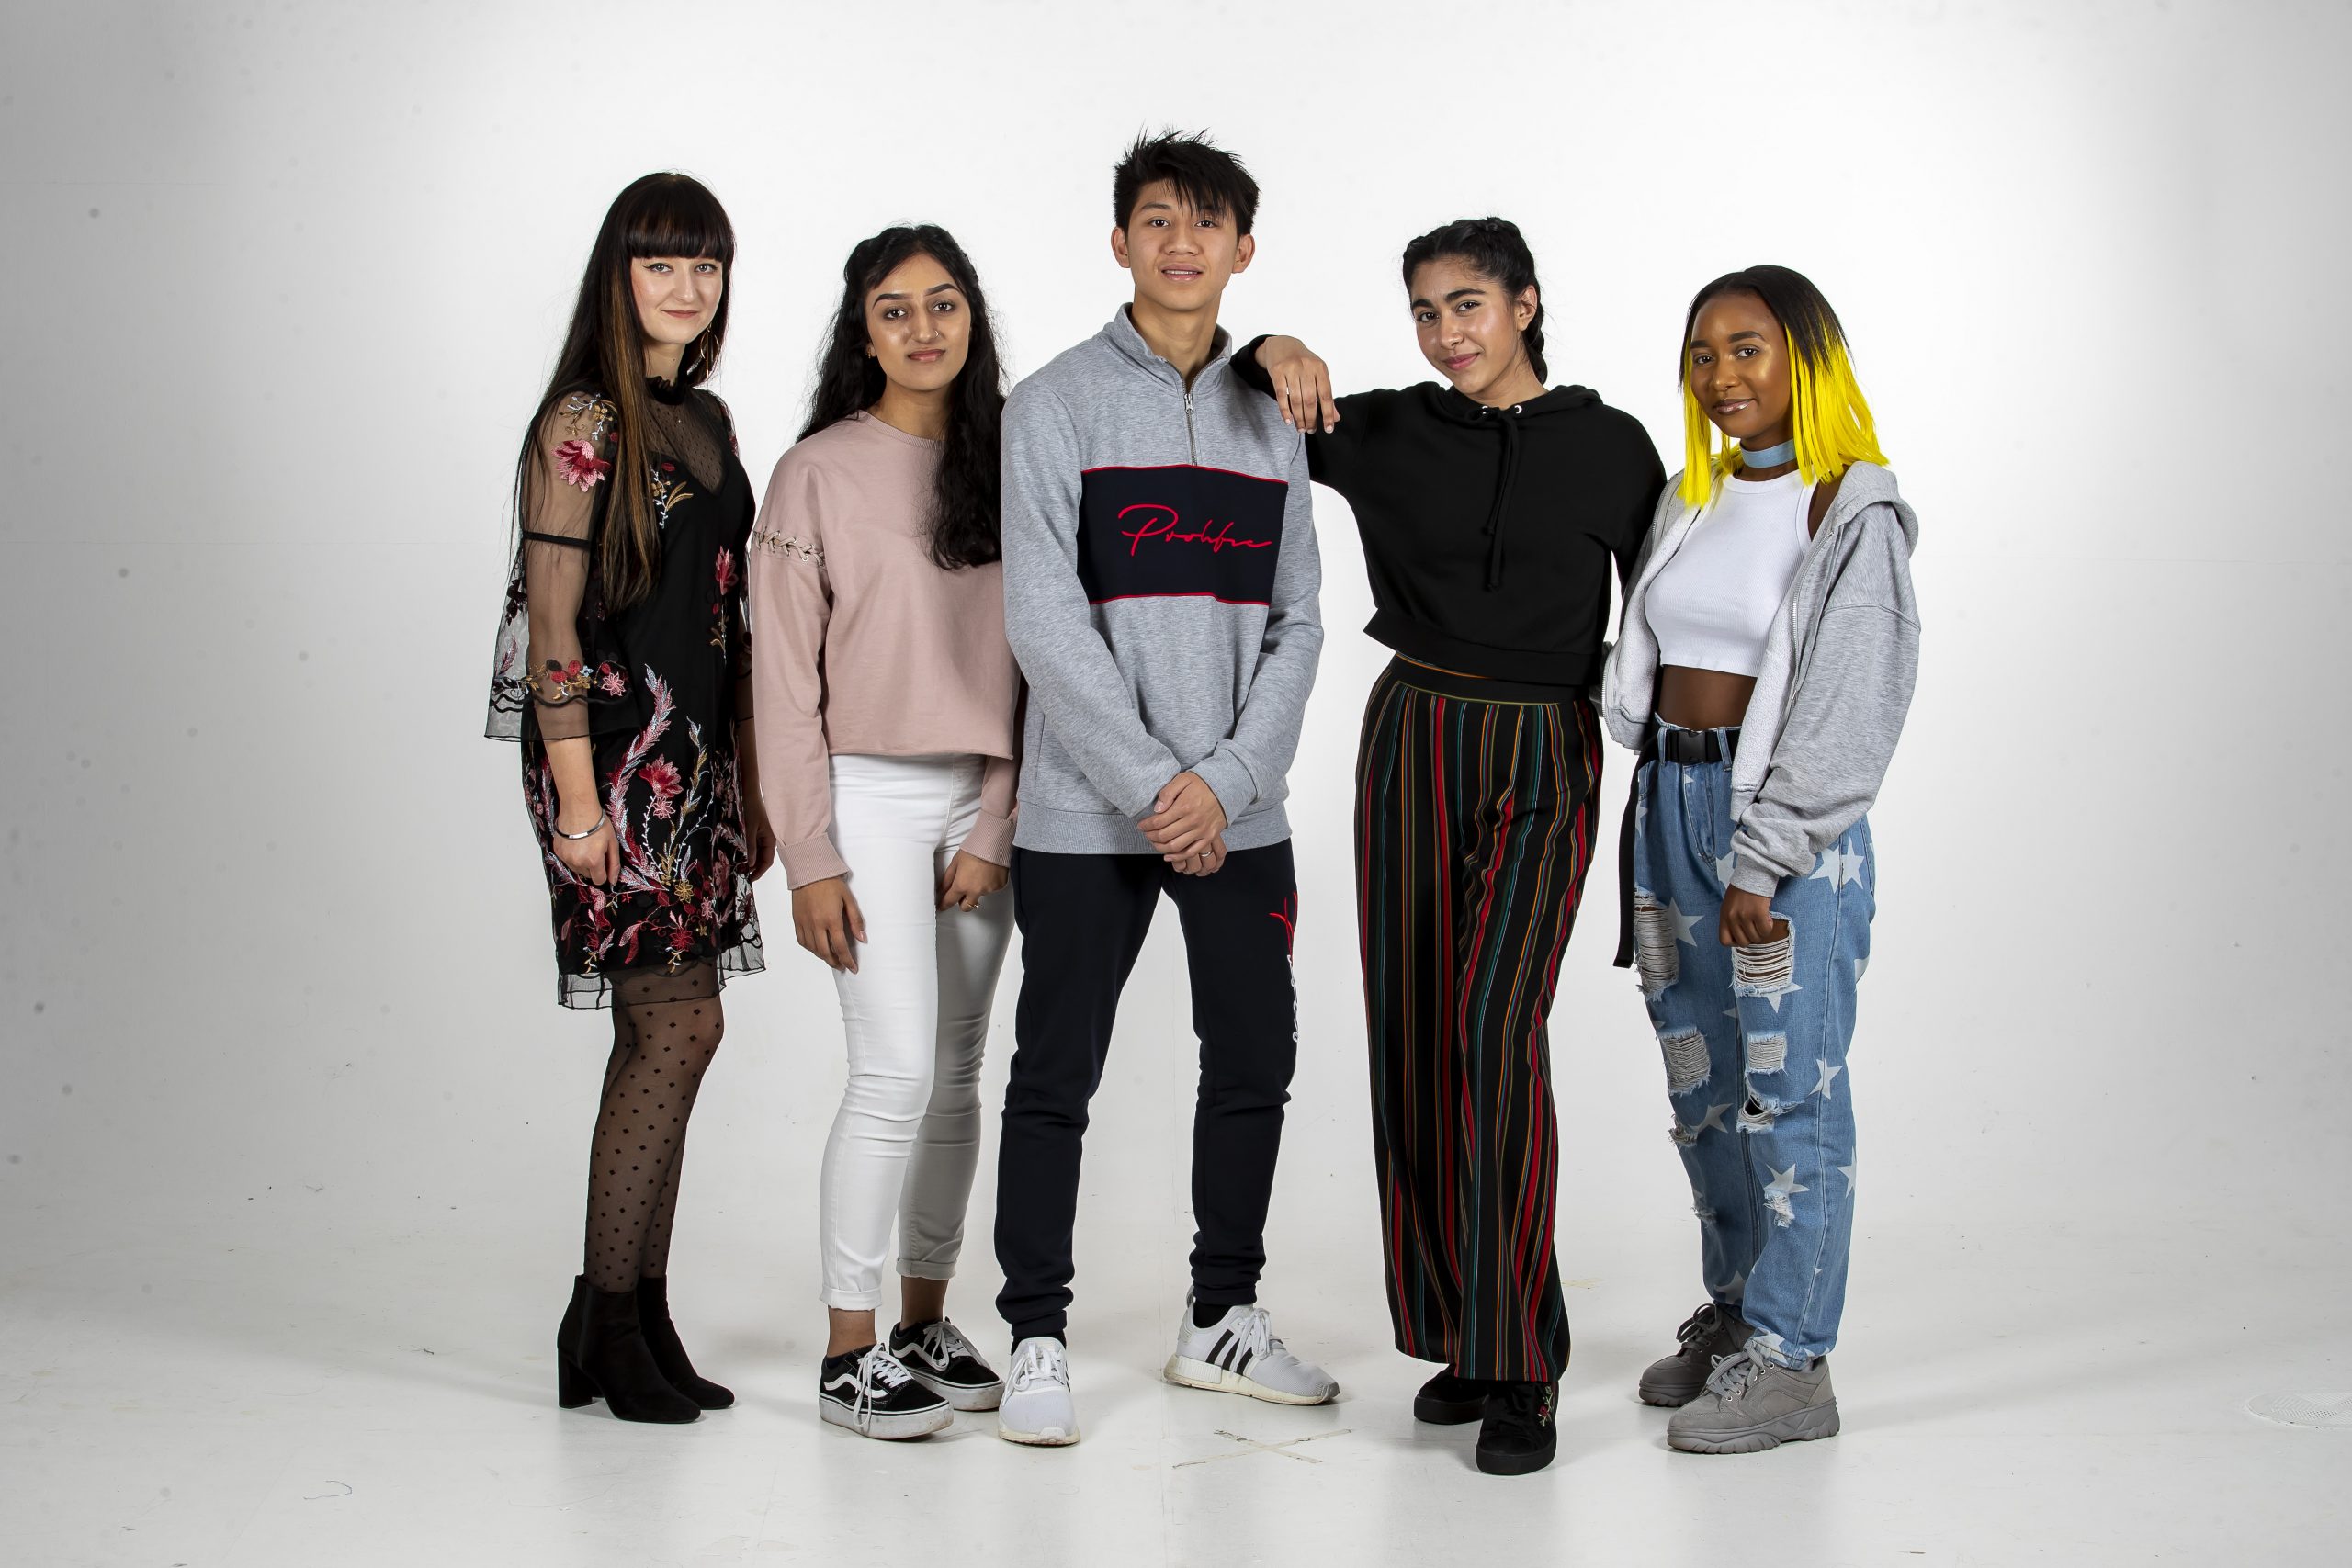 Group of students in photography studio